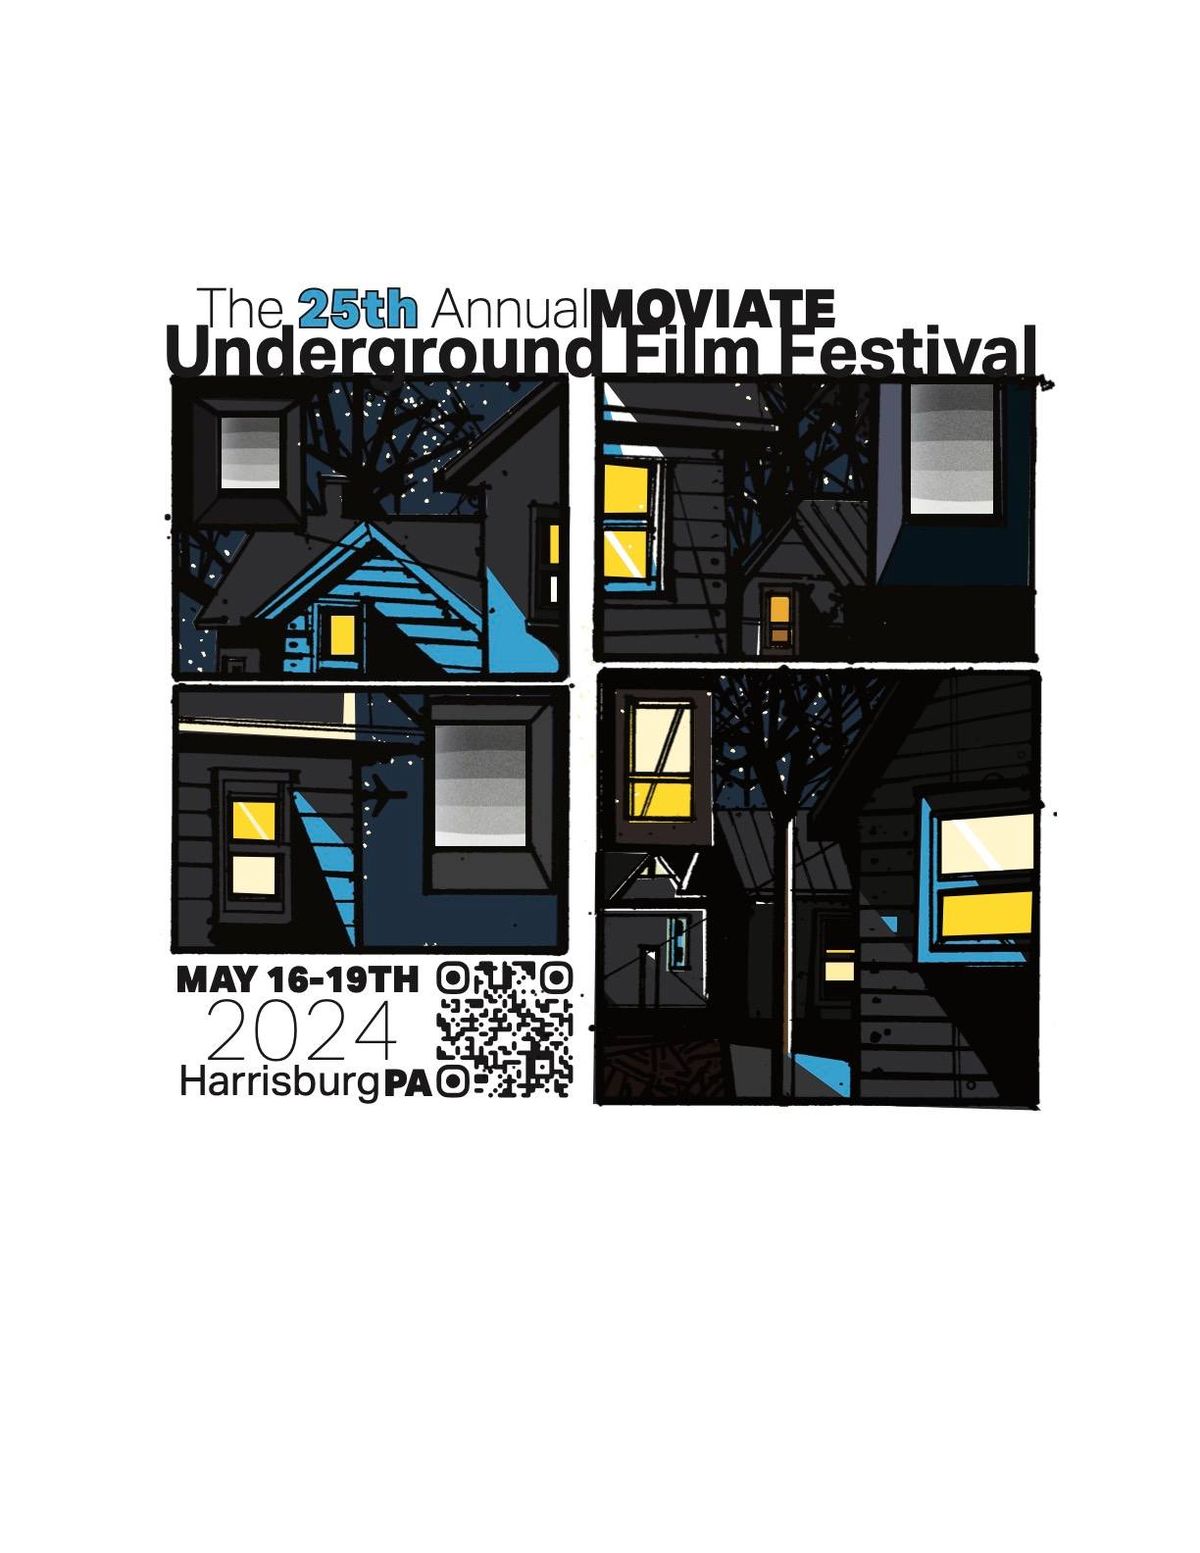 The 25th Annual MOVIATE UNDERGROUND FILM FESTIVAL: May 16th-19th, 2024